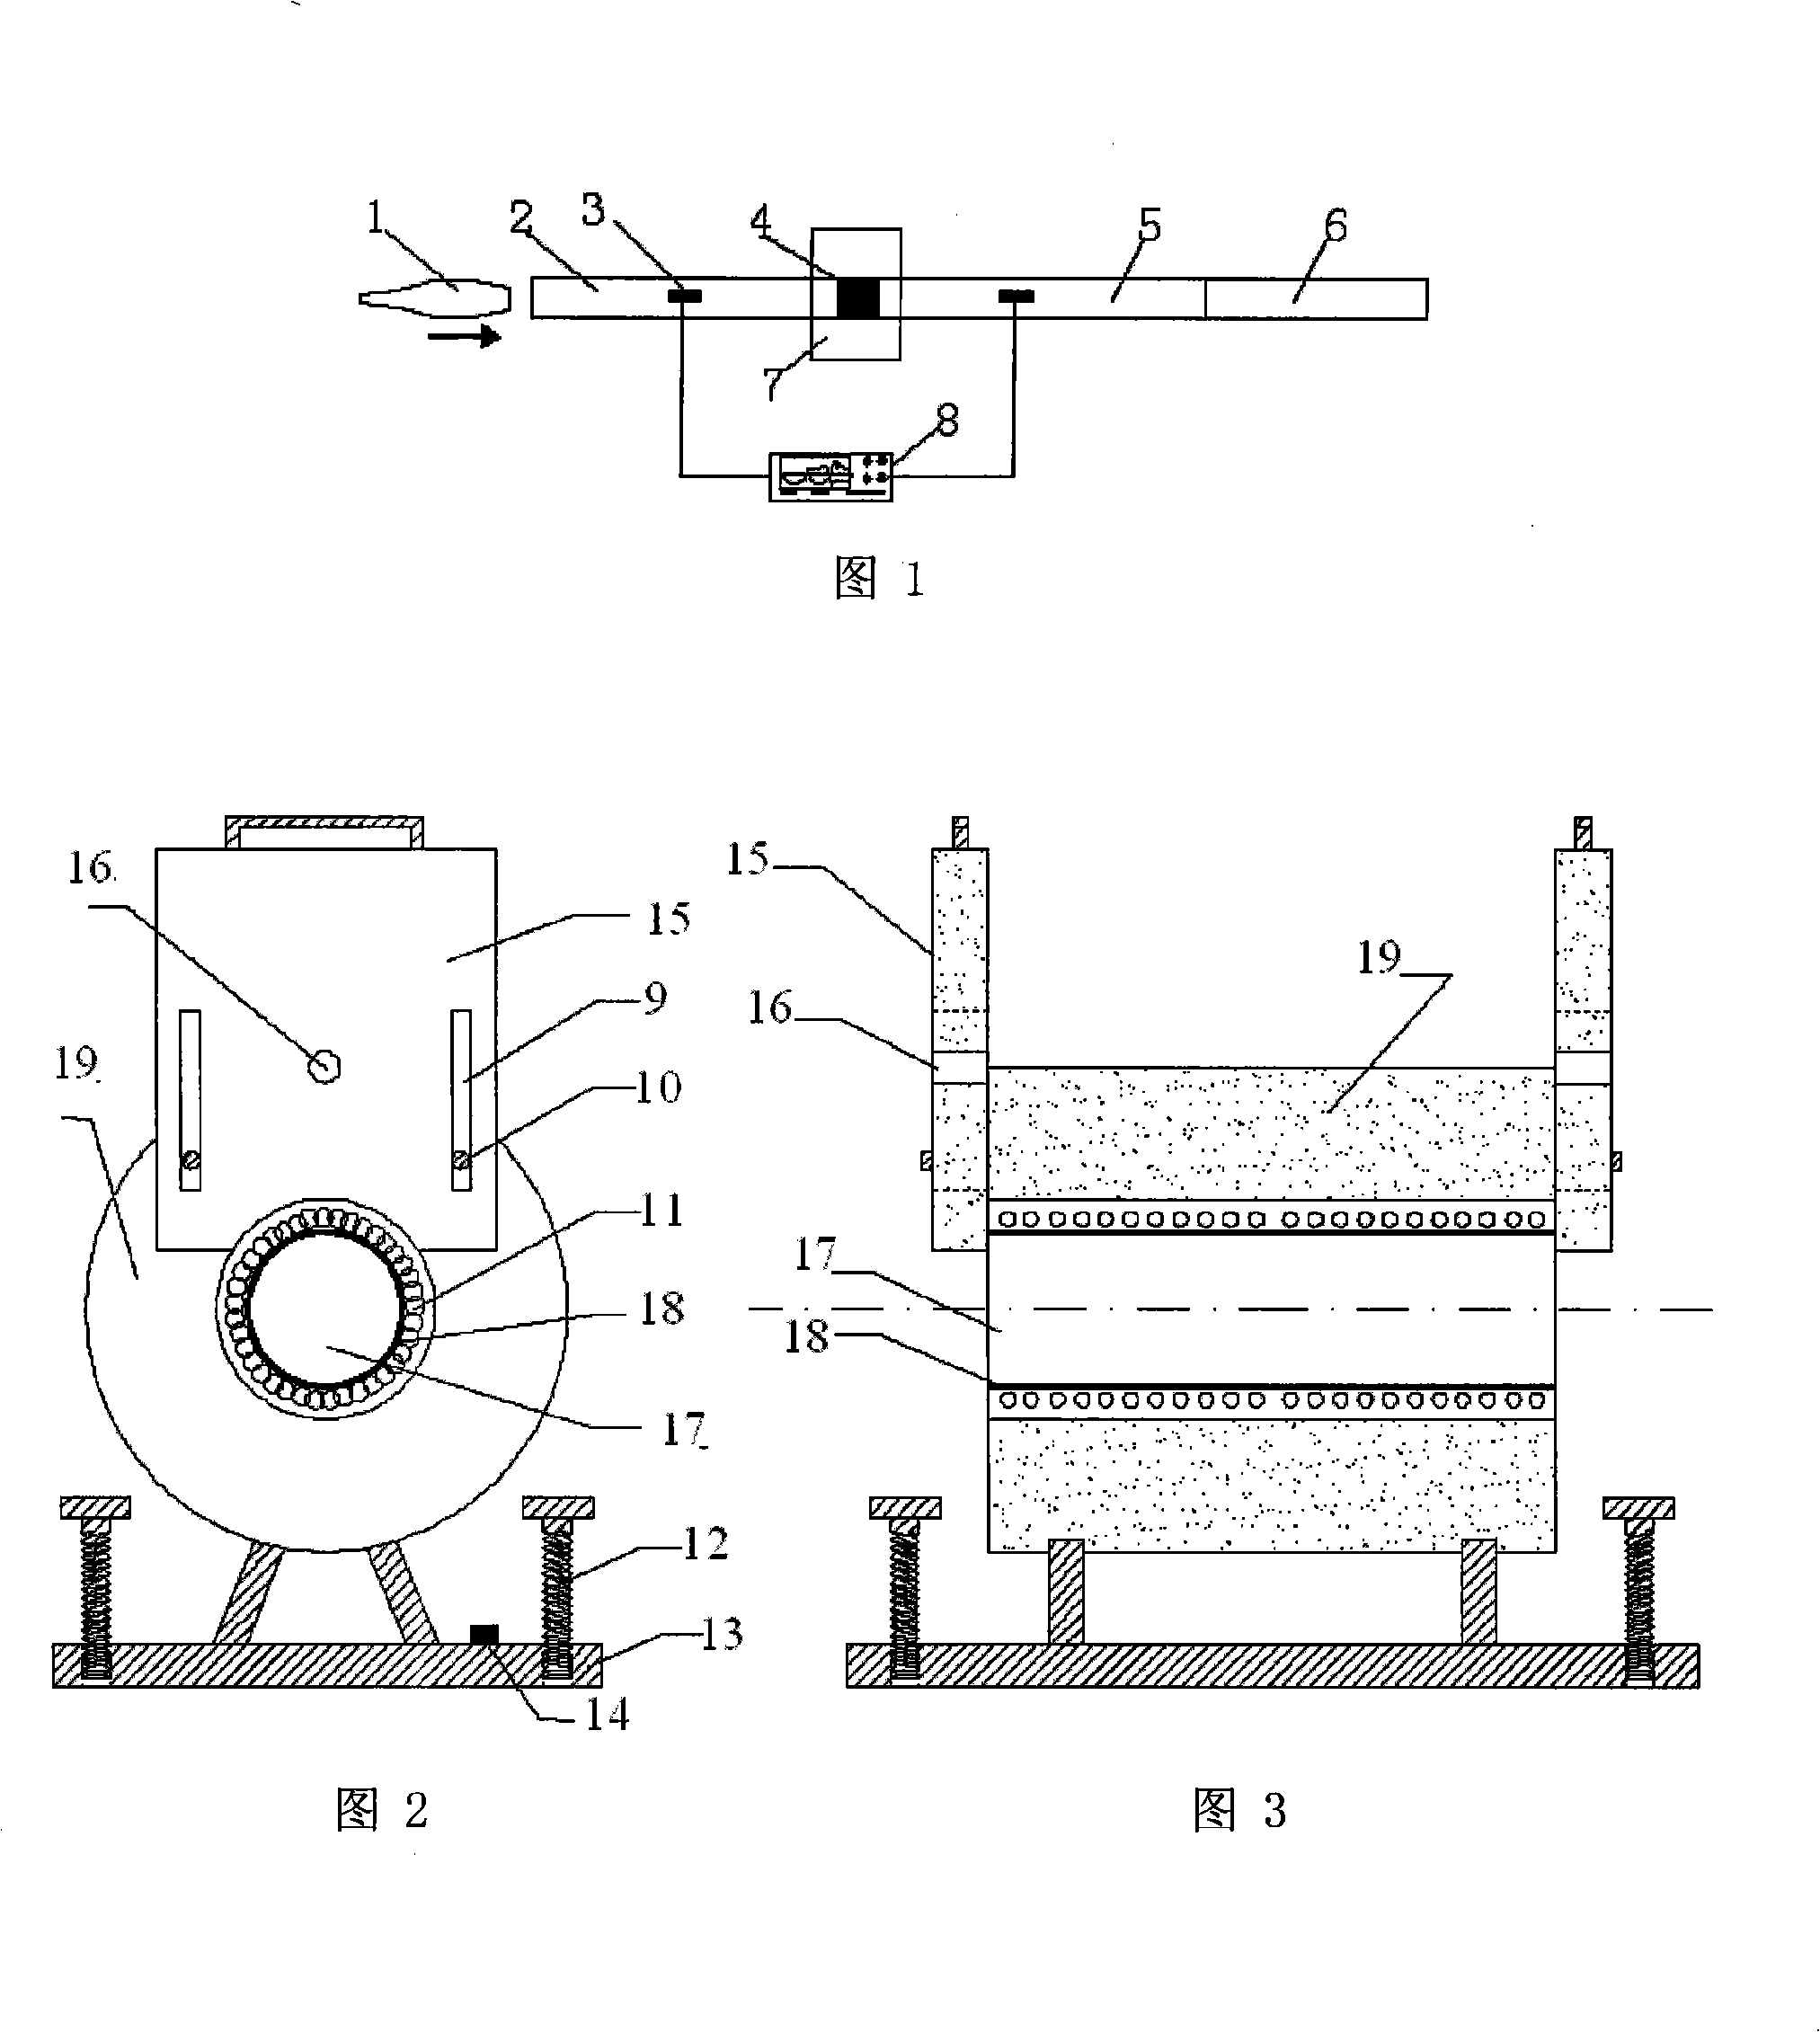 Sample heating apparatus used for rock impact experiment